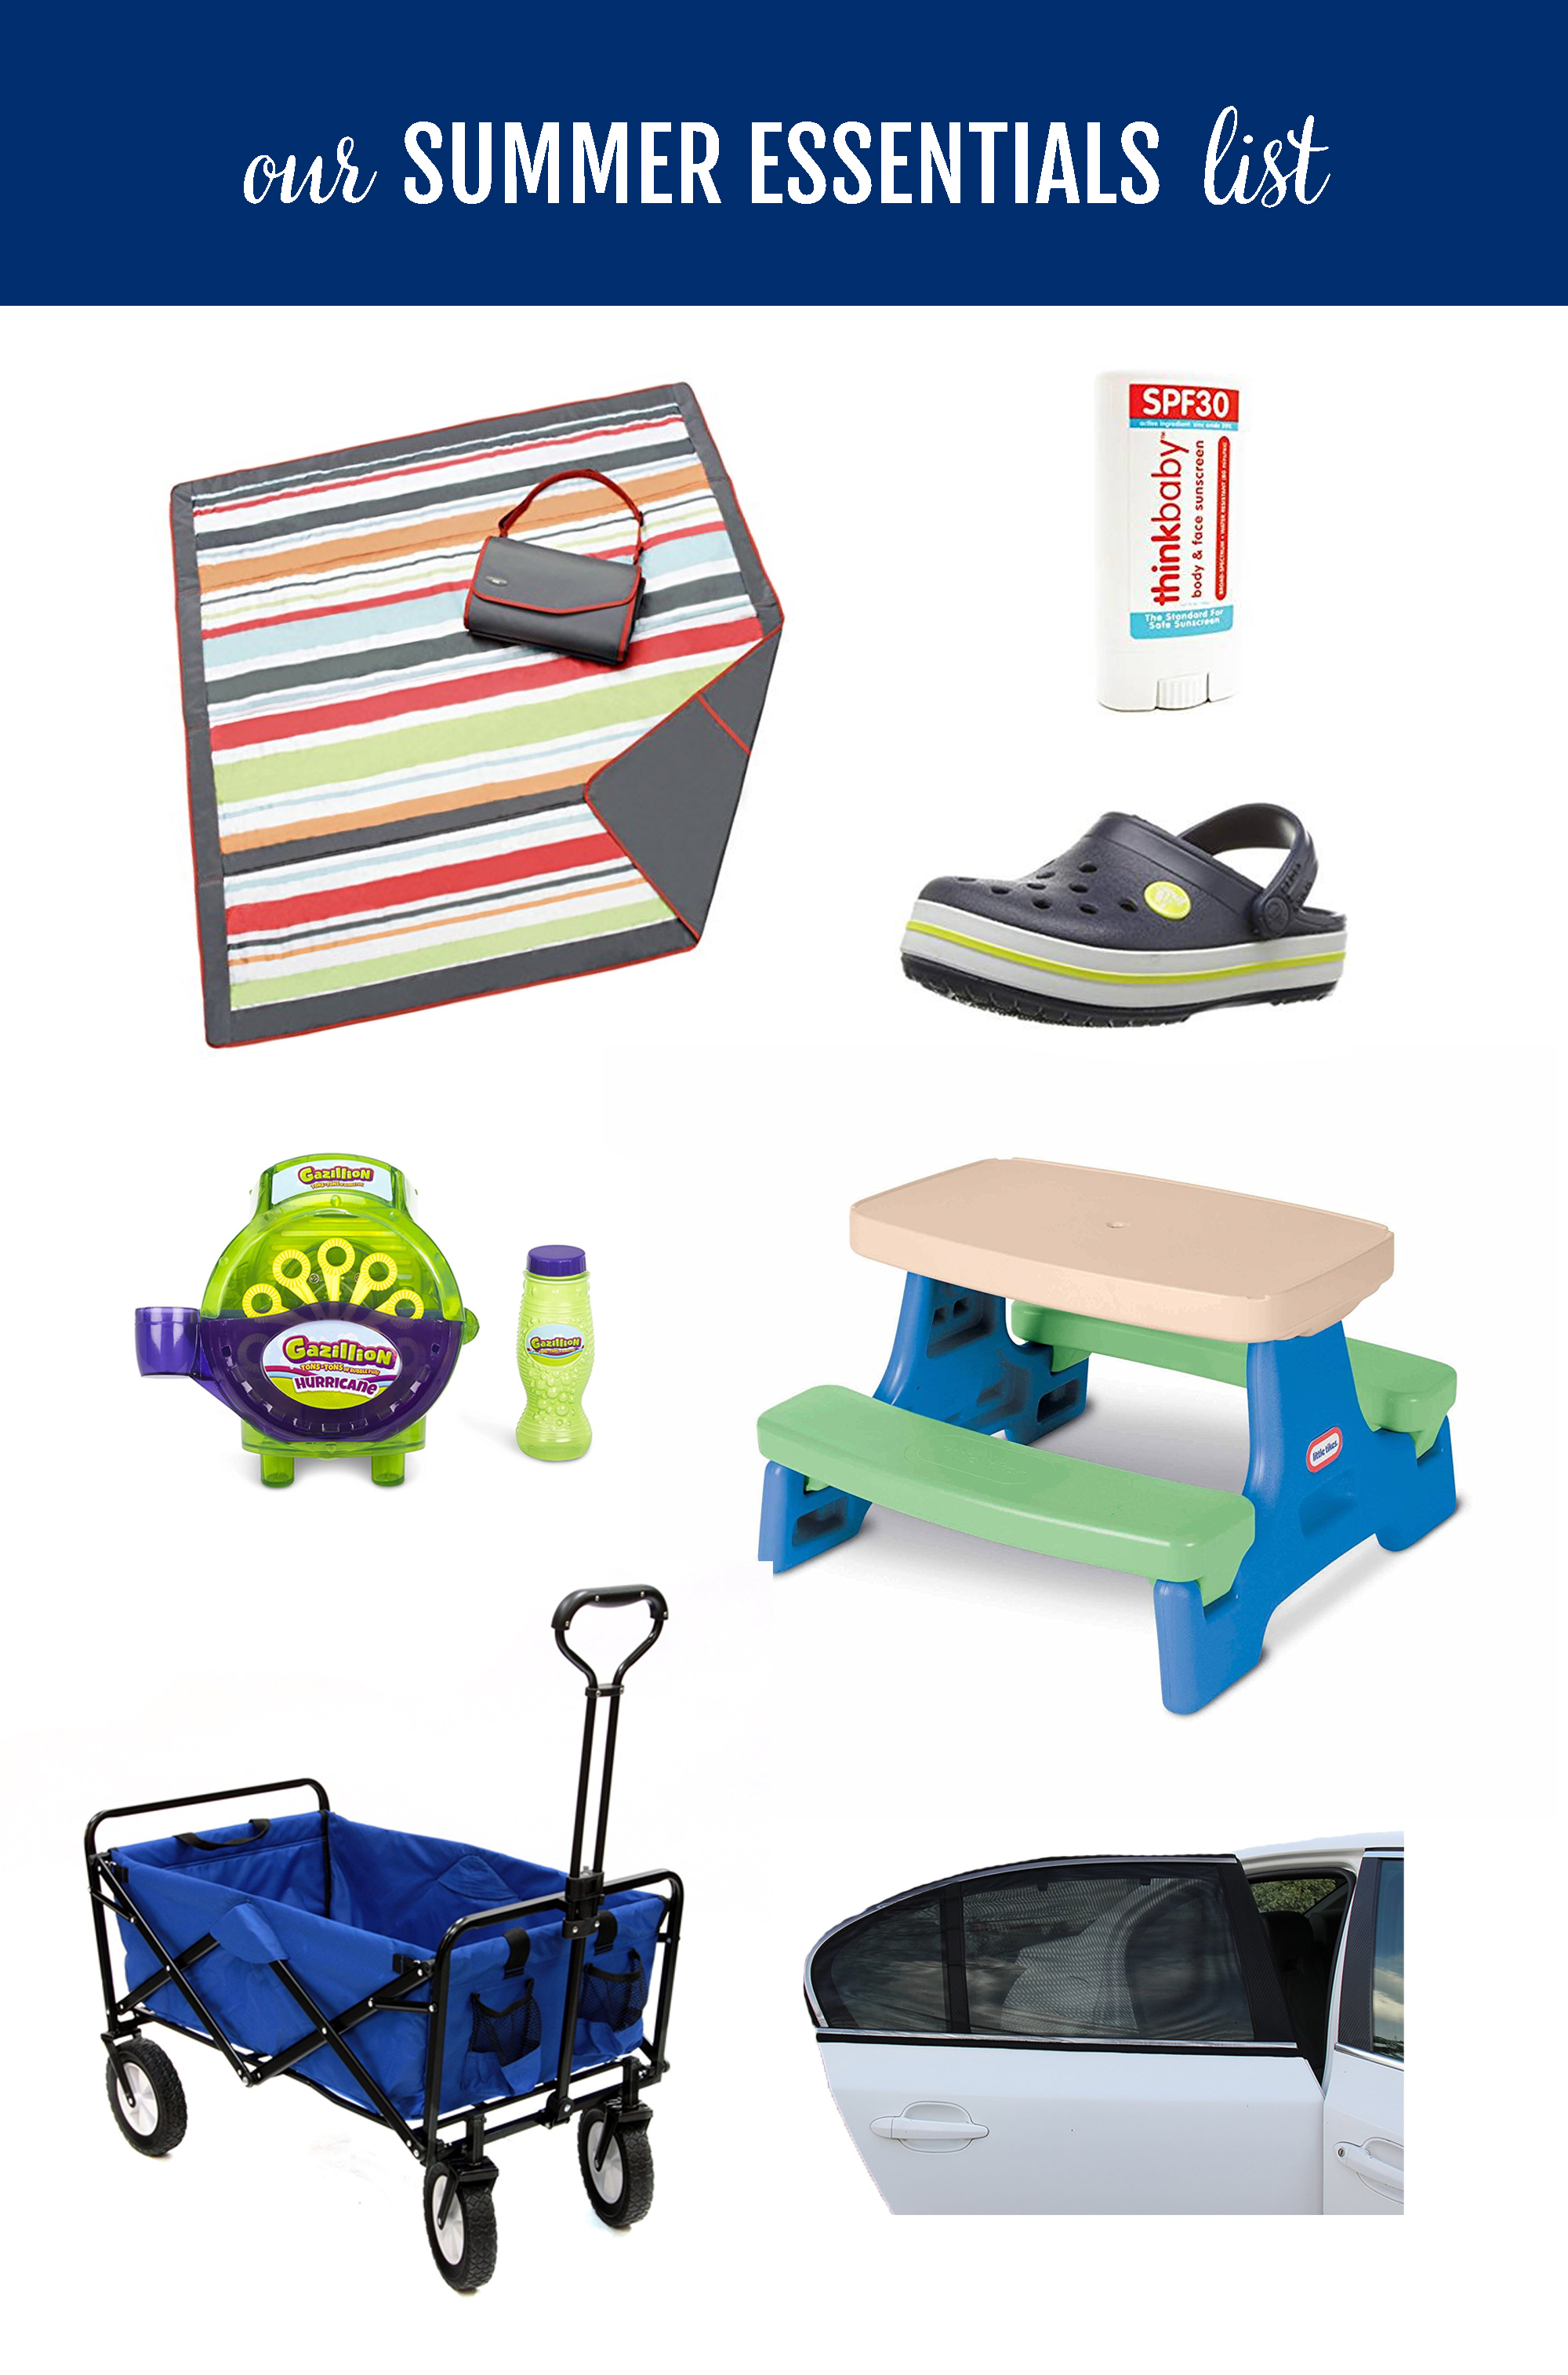 Summer is here!  I put together a short list of summer essentials that we use nearly everyday because they make summer (with kids) better!